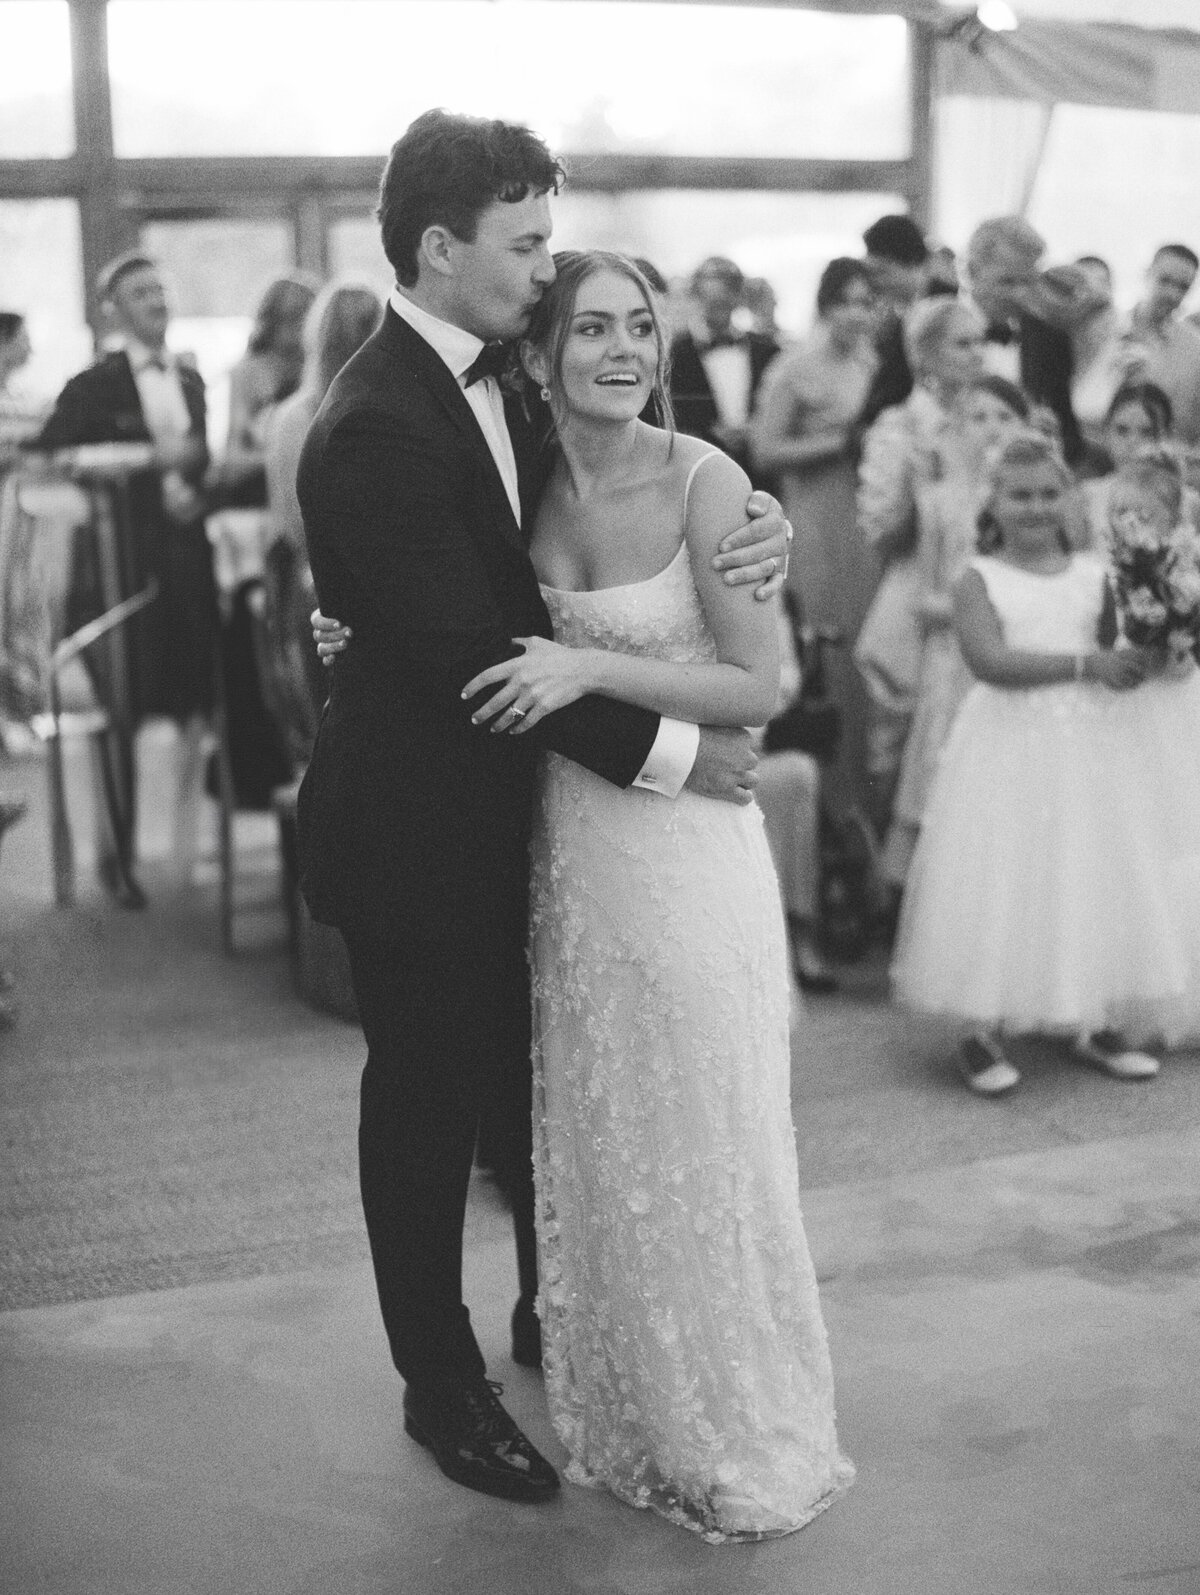 Groom embraces his stunning bride as she smiles on their wedding day